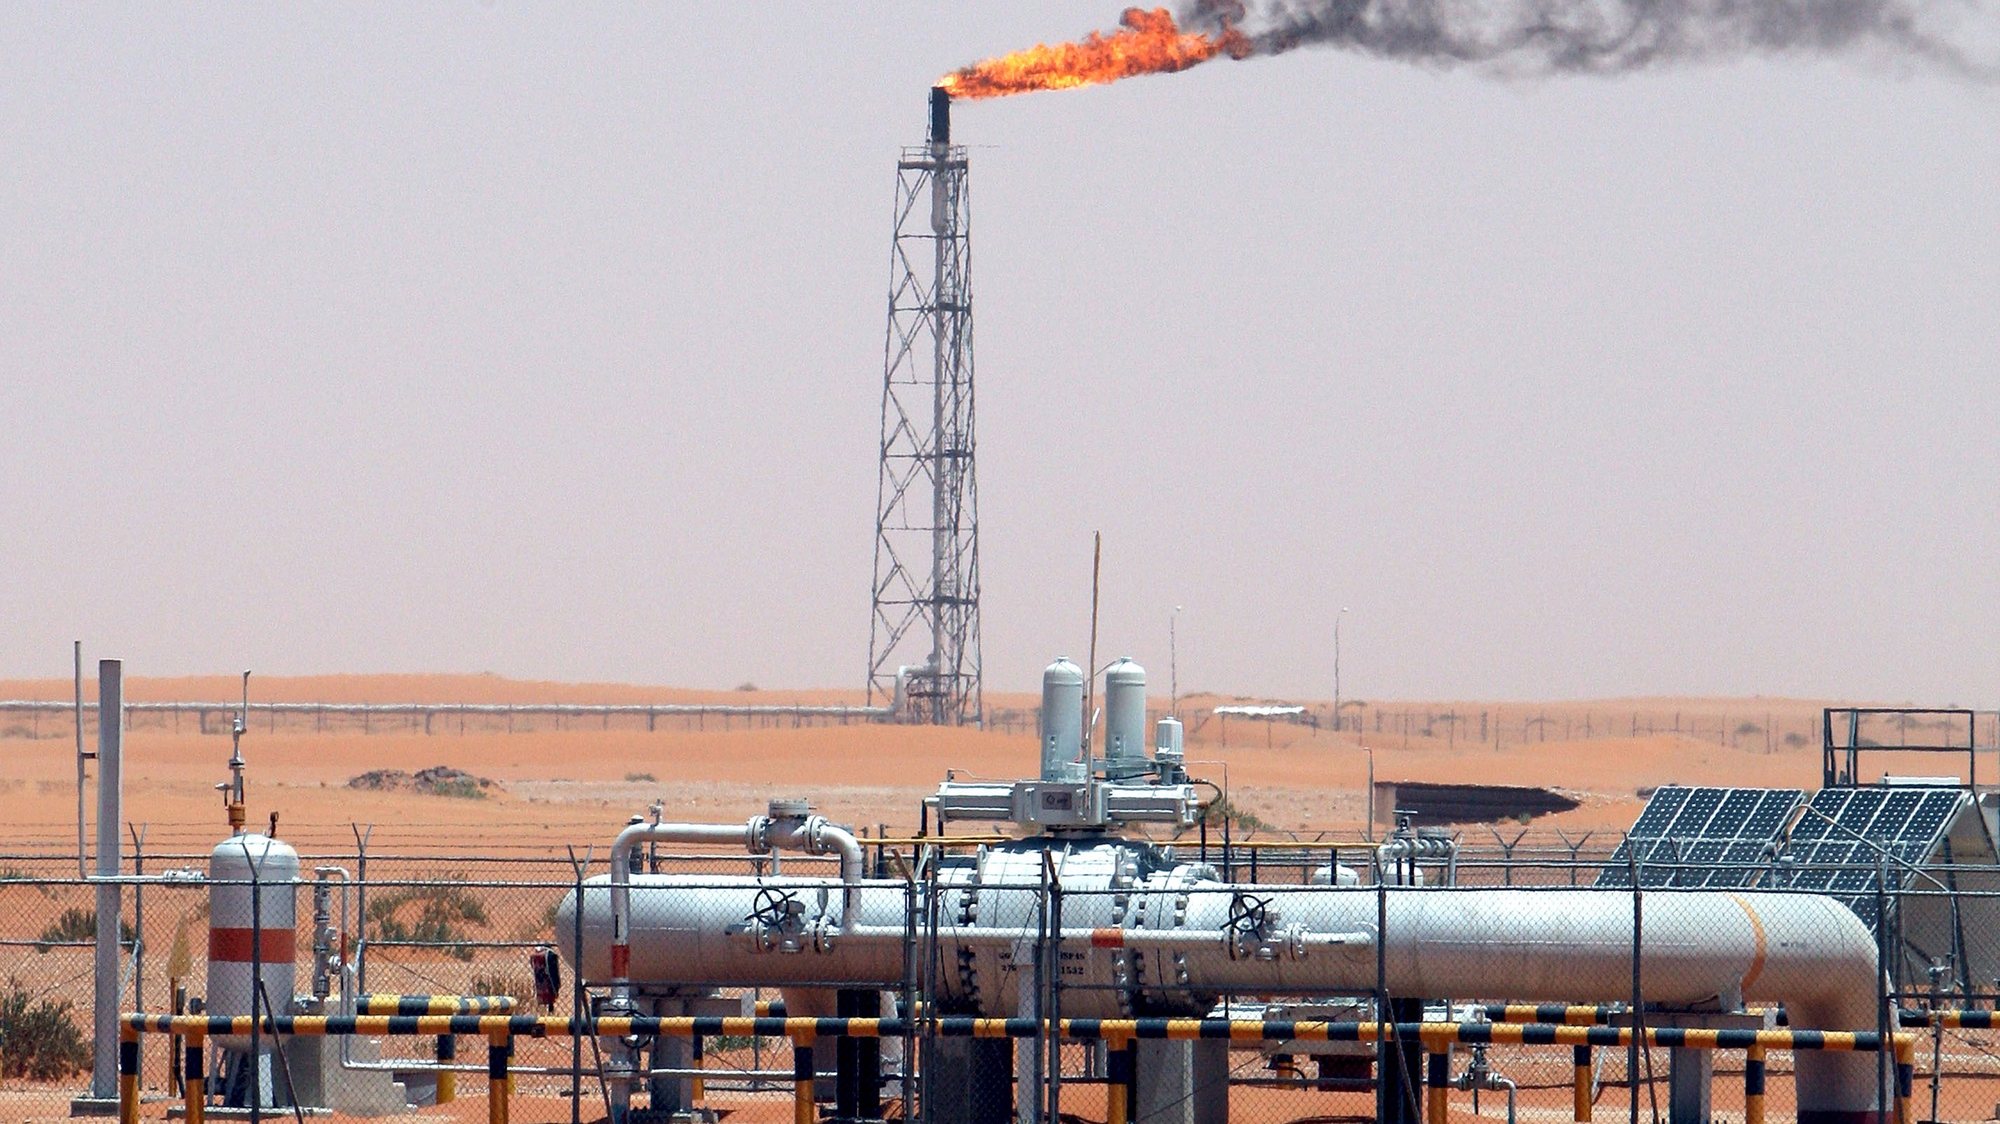 epa09087338 (FILE) - A gas flame behind pipelines in the desert at Khurais oil field, about 160 km from Riyadh, Kingdom of Saudi Arabia, 23 June 2008 (reissued 21 March 2021). Energy giant Saudi Aramco, the world&#039;s biggest oil company, says that its profits sharply fell in 2020 to 49 billion USD down from 88.2 billion USD in 2019 and 111.1 billion USD in 2018.The sharp dive came as the coronavirus pandemic hit global energy markets.  EPA/ALI HAIDER *** Local Caption *** 55598188